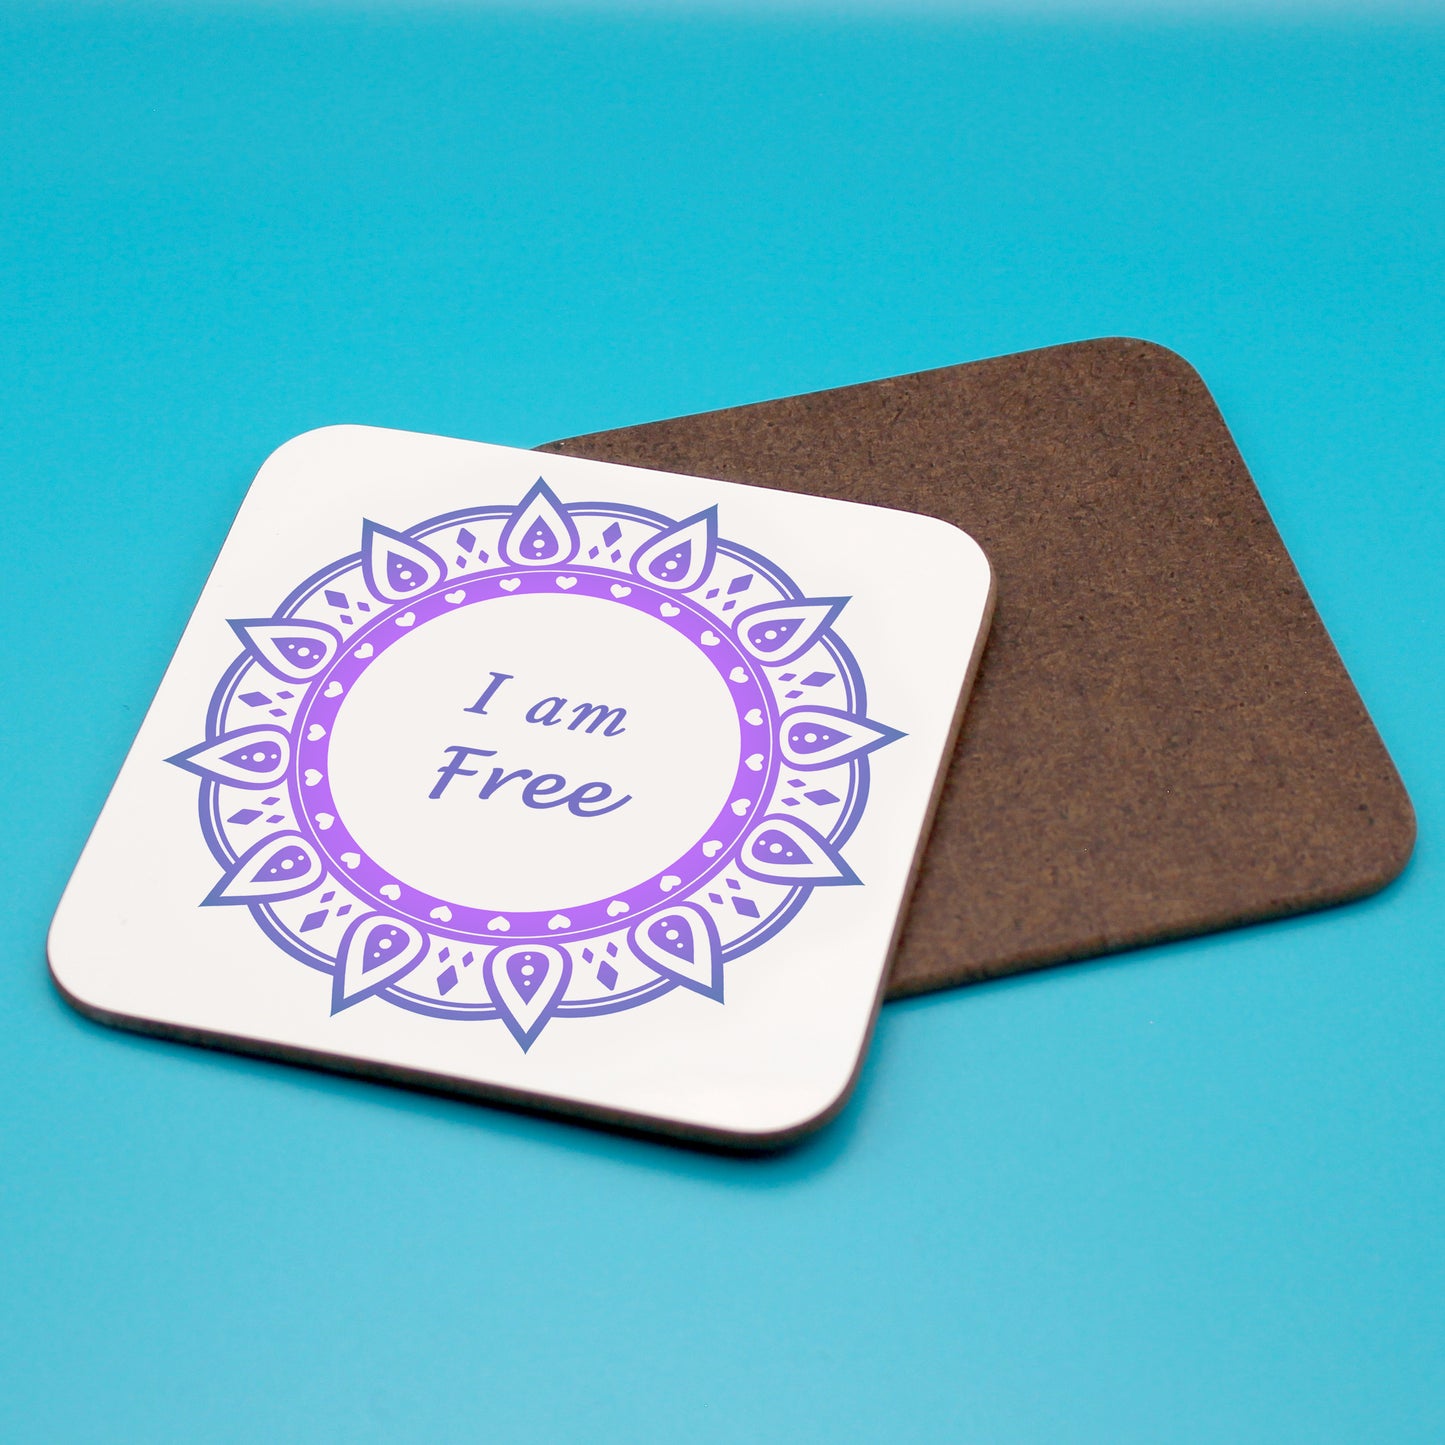 White personal affirmation coaster with tow-tone purple mandala design. Daily affirmation reads I am Free. Coaster underneath shows wood backing